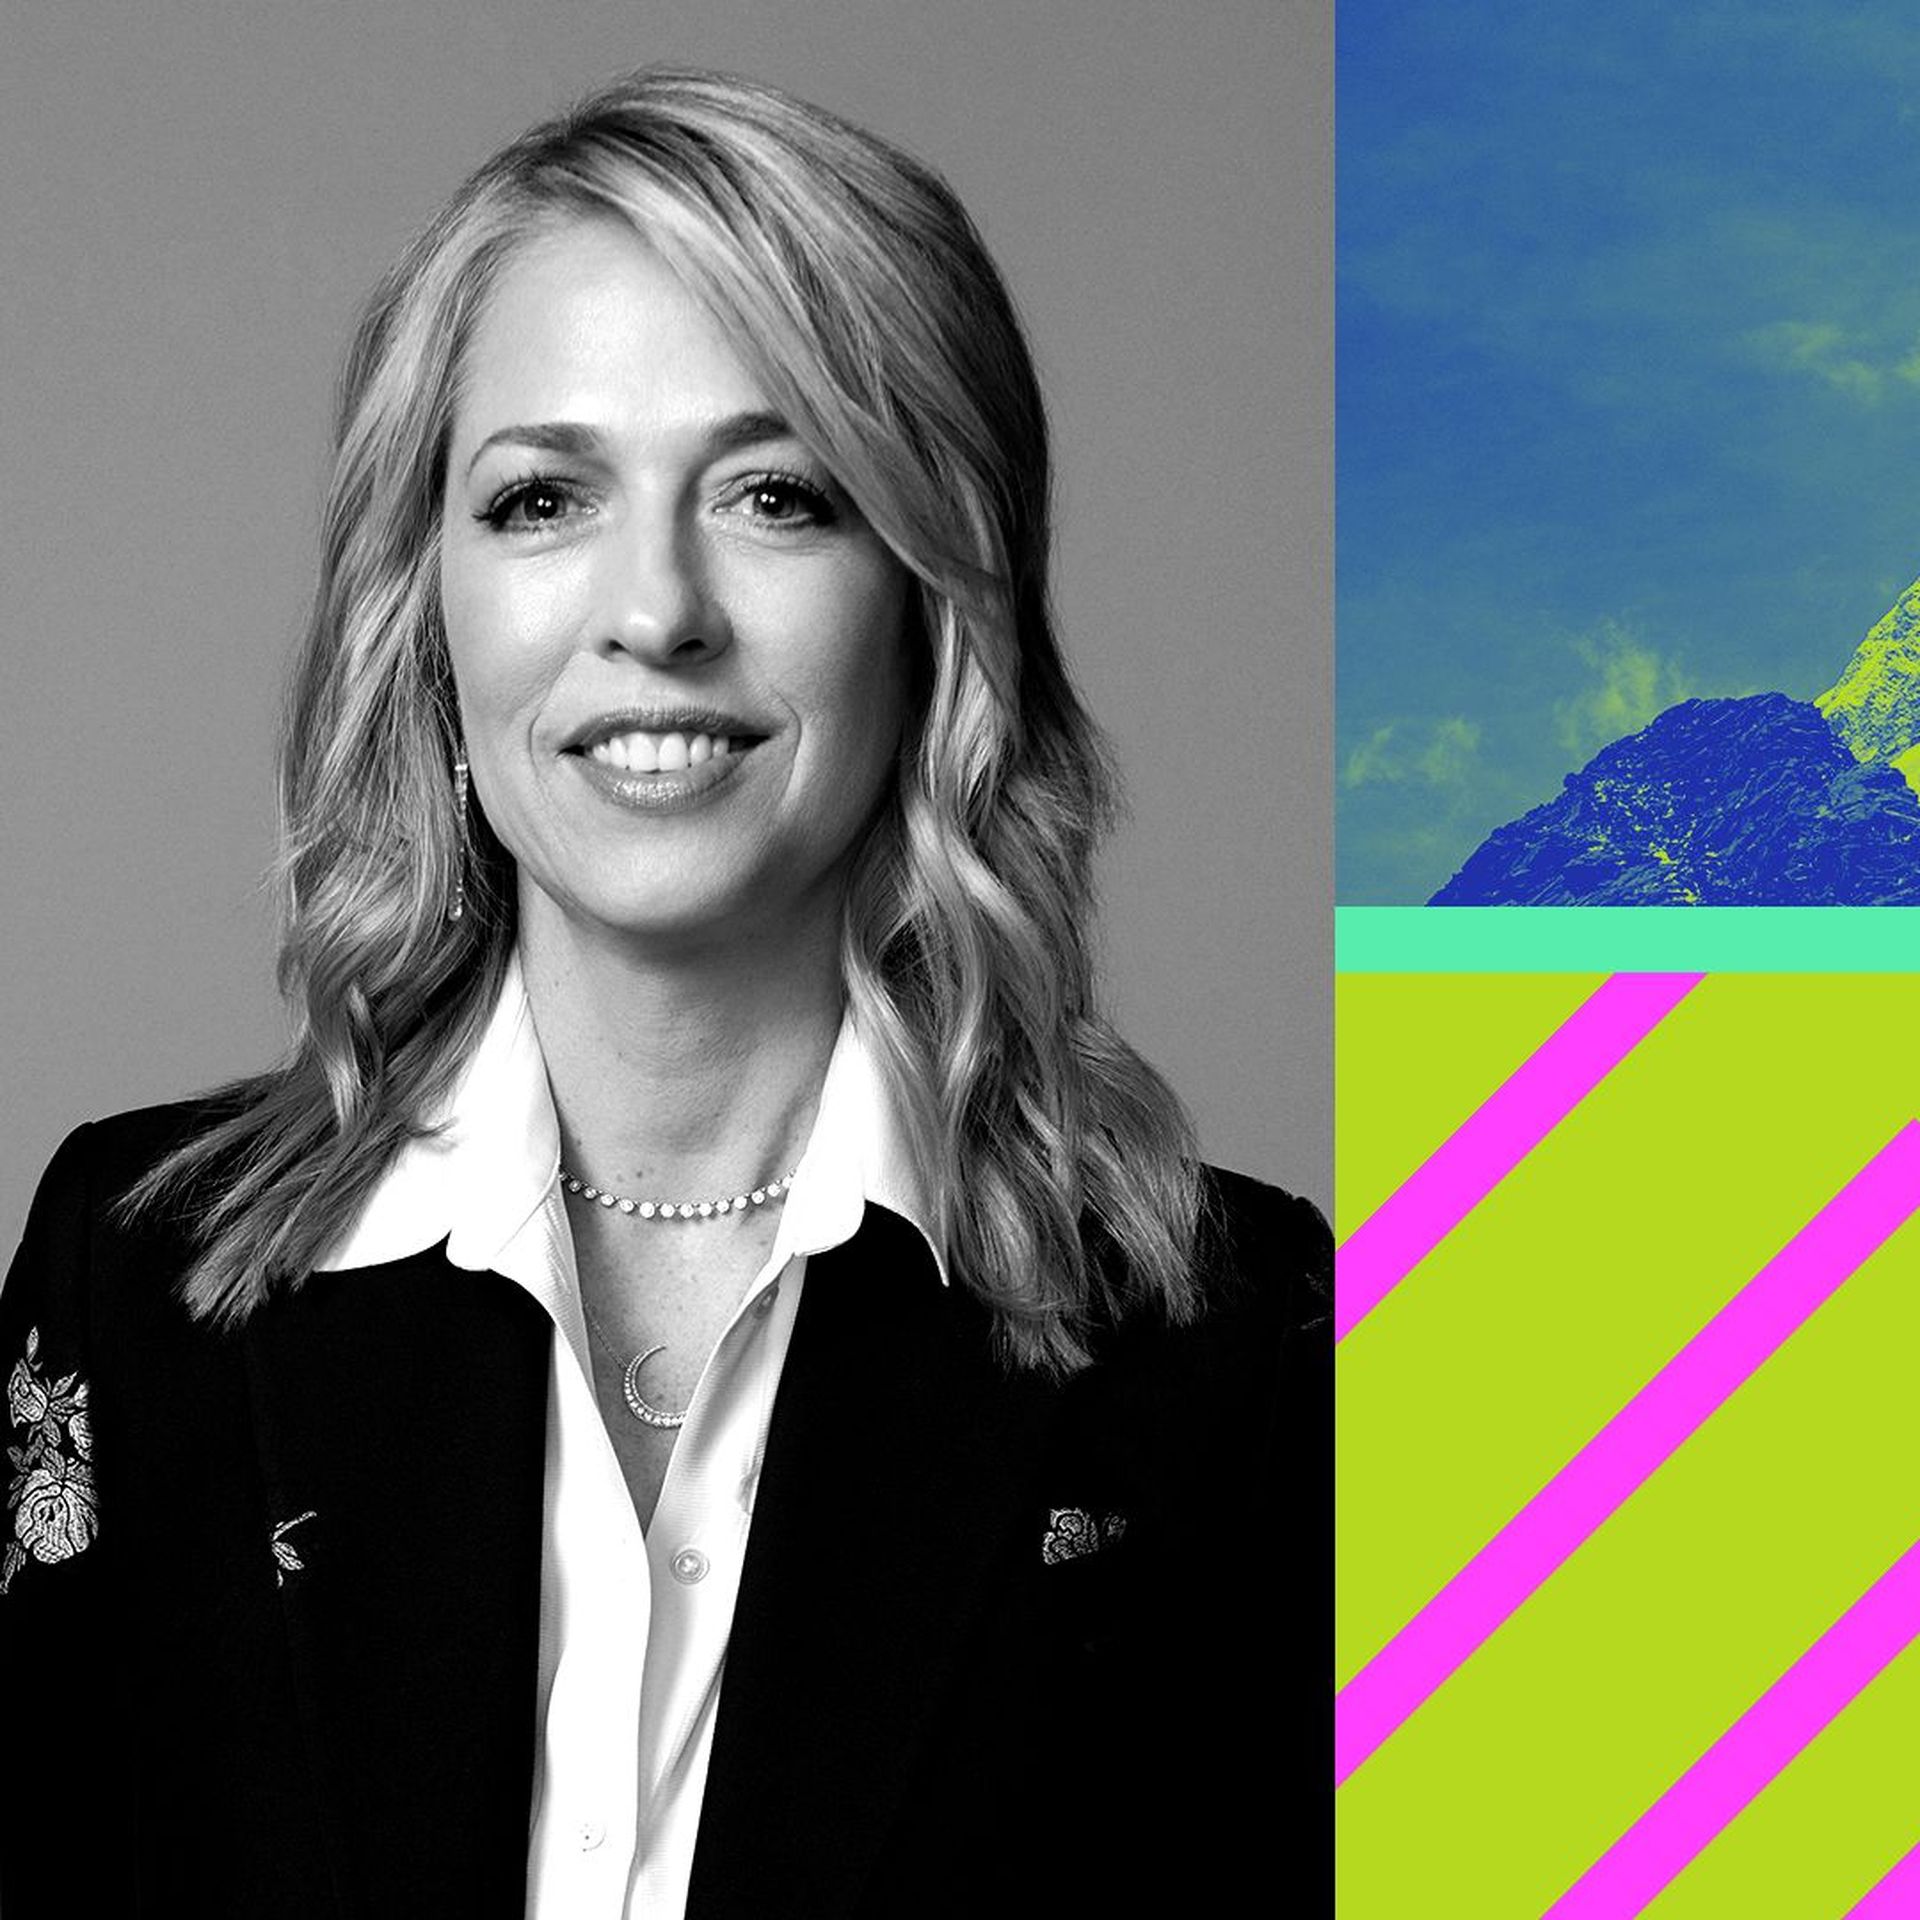 Photo illustration of Pam Kaufman, the mountain from the Paramount logo, and colored rectangles.